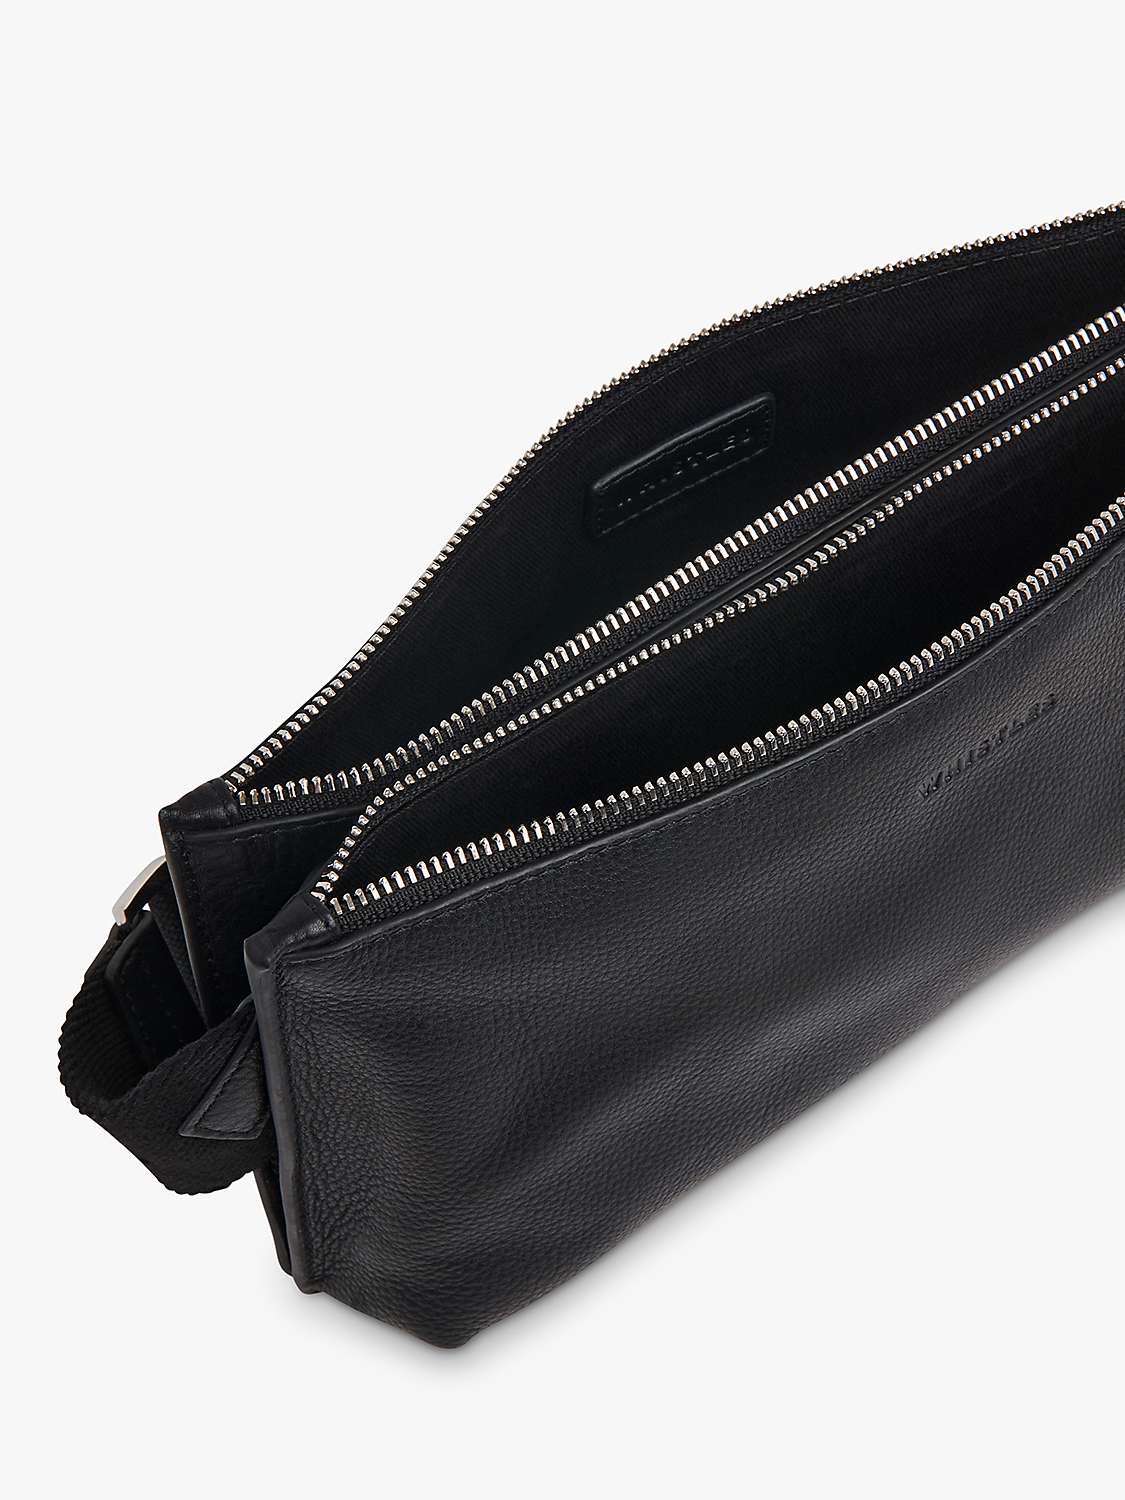 Whistles Rae Flat Leather Double Pouch Bag, Black at John Lewis & Partners